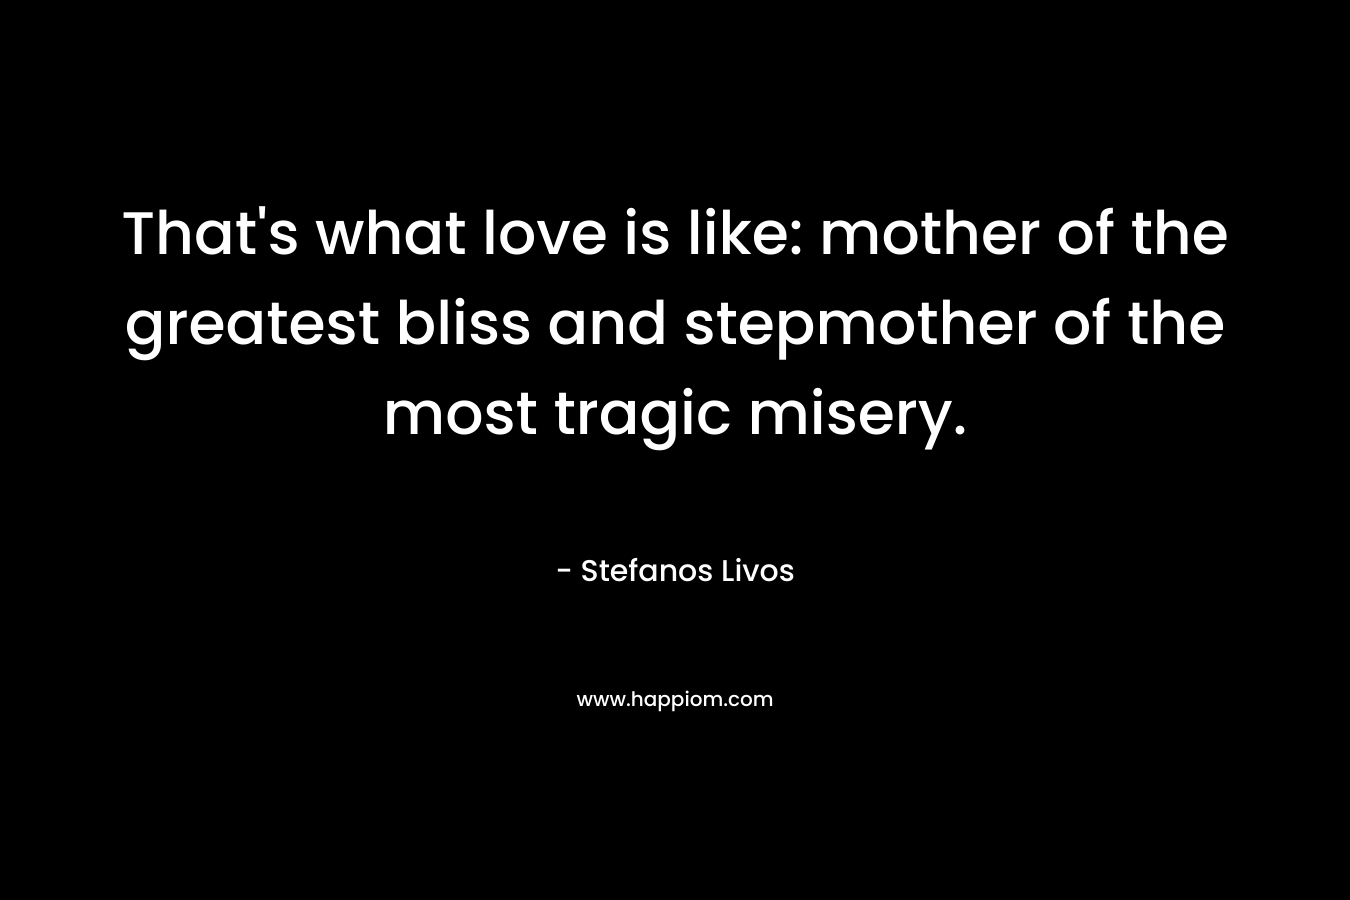 That's what love is like: mother of the greatest bliss and stepmother of the most tragic misery.